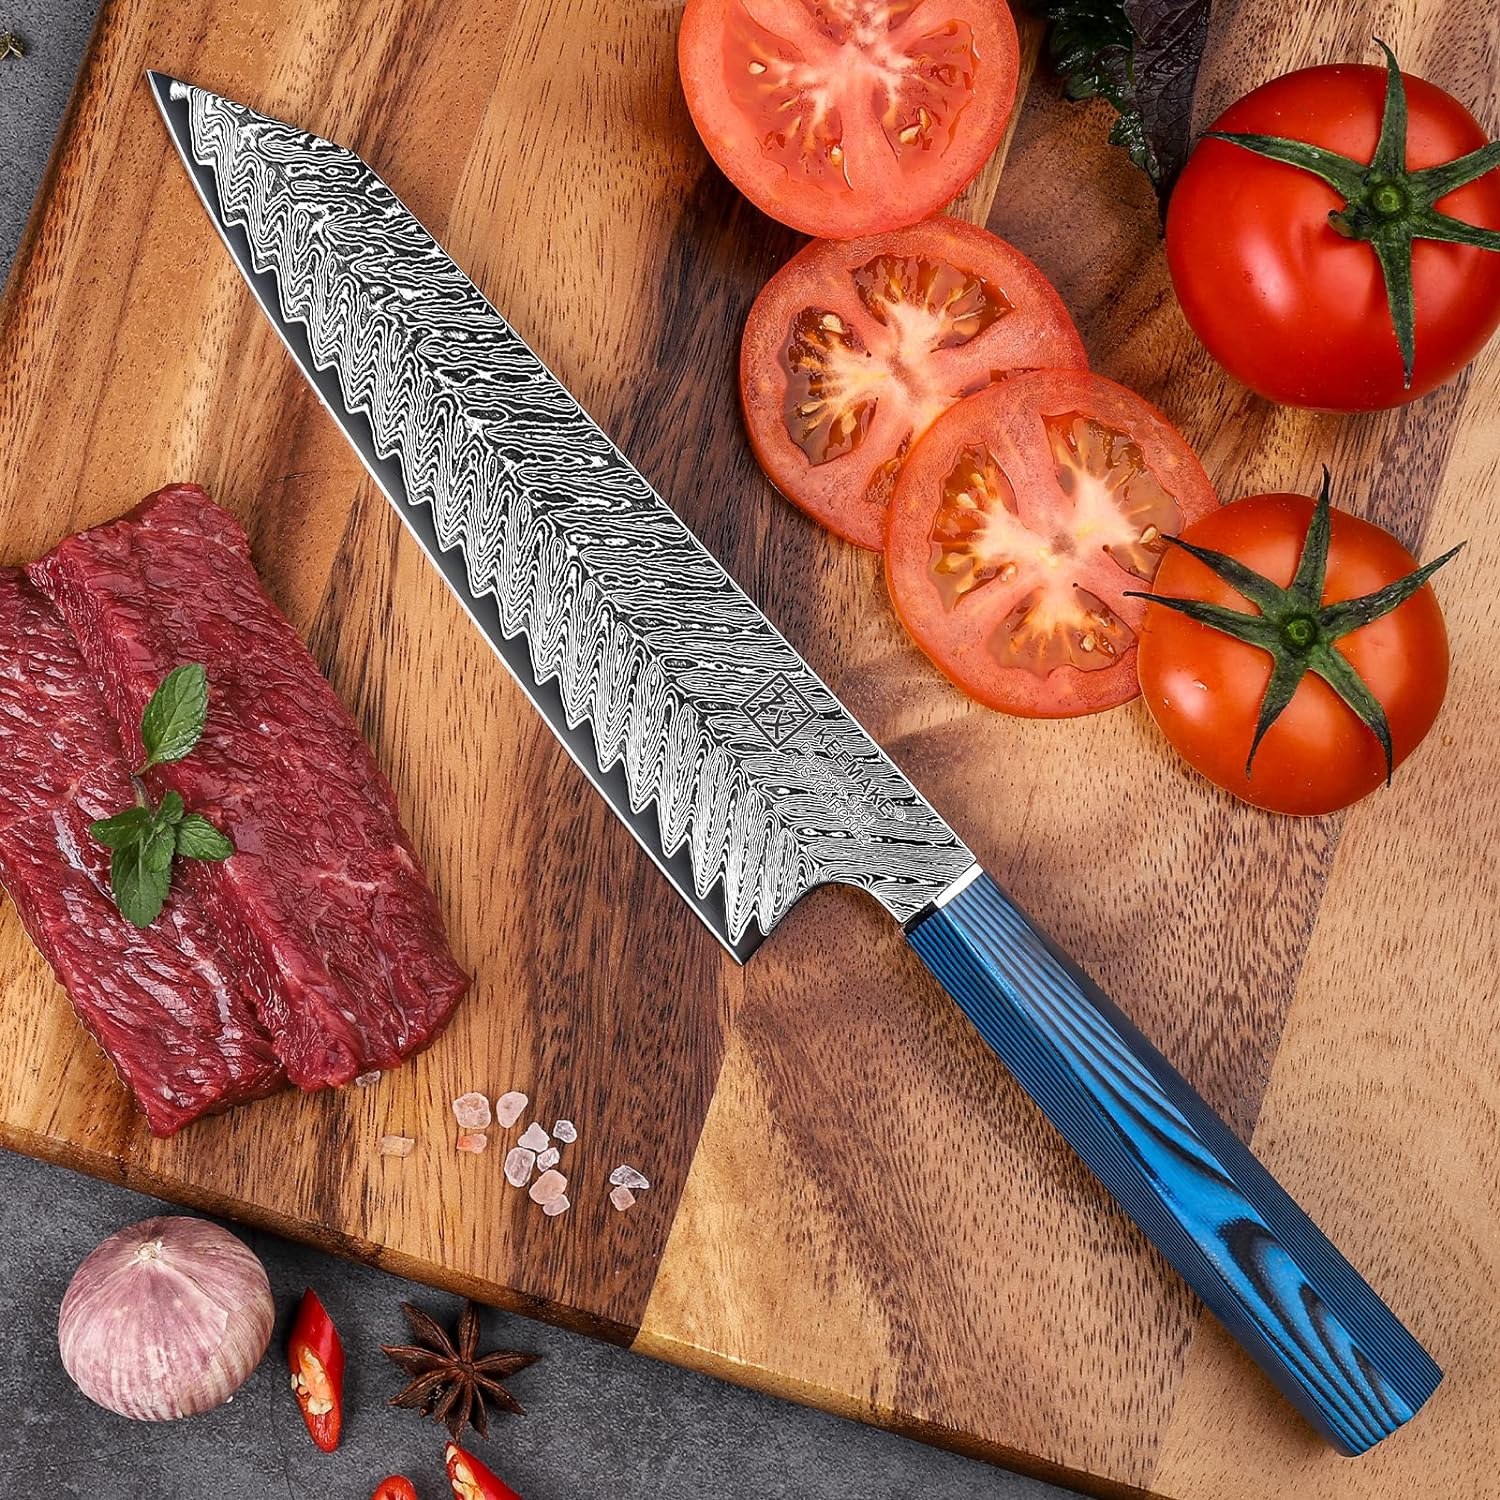 Keemake kitchen knife 8inch Gyuto chef's knife 67 layers Damascus stainless steel  for kitchen meat cutting(Blue G10 Handle)